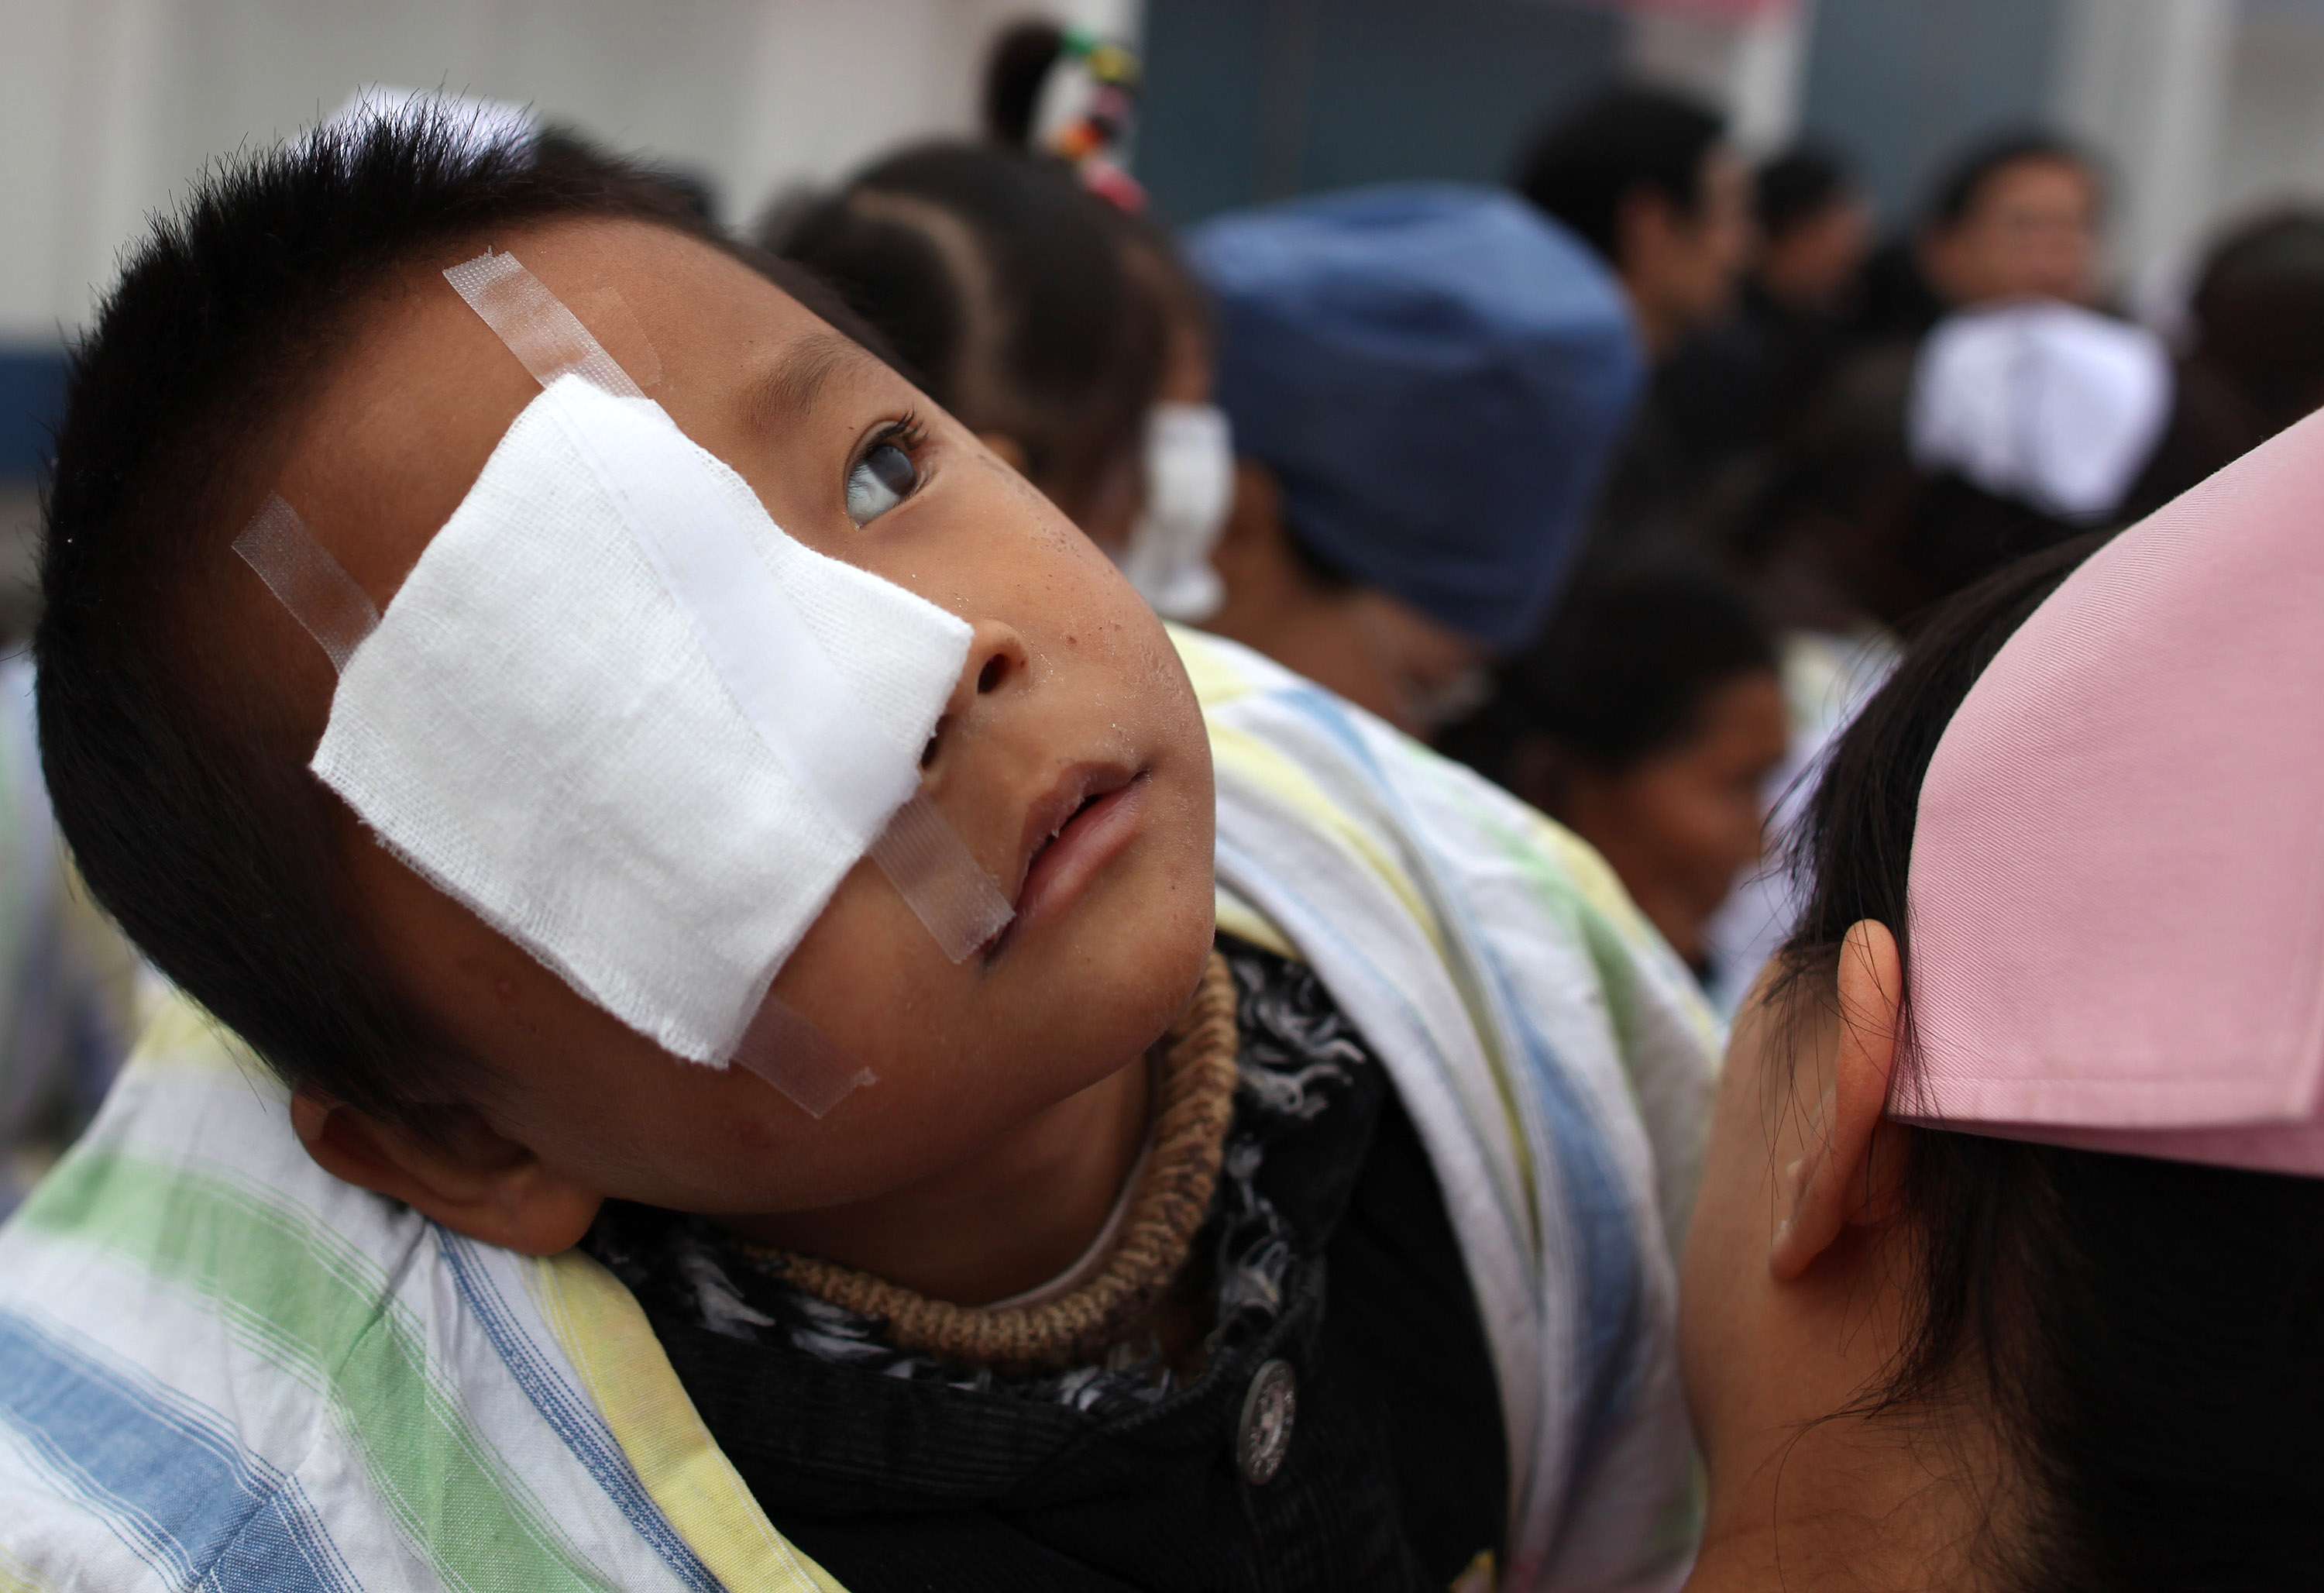 A nurse tends to a boy who has undergone cataract surgery in a hospital in Suining in Sichuan Province. Private hospitals, especially those focusing on conditions considered as “minor specialities”, such as eye diseases, are predicted to enjoy strong profit growth in the next few years, according to fresh research. . Photo: Getty Images